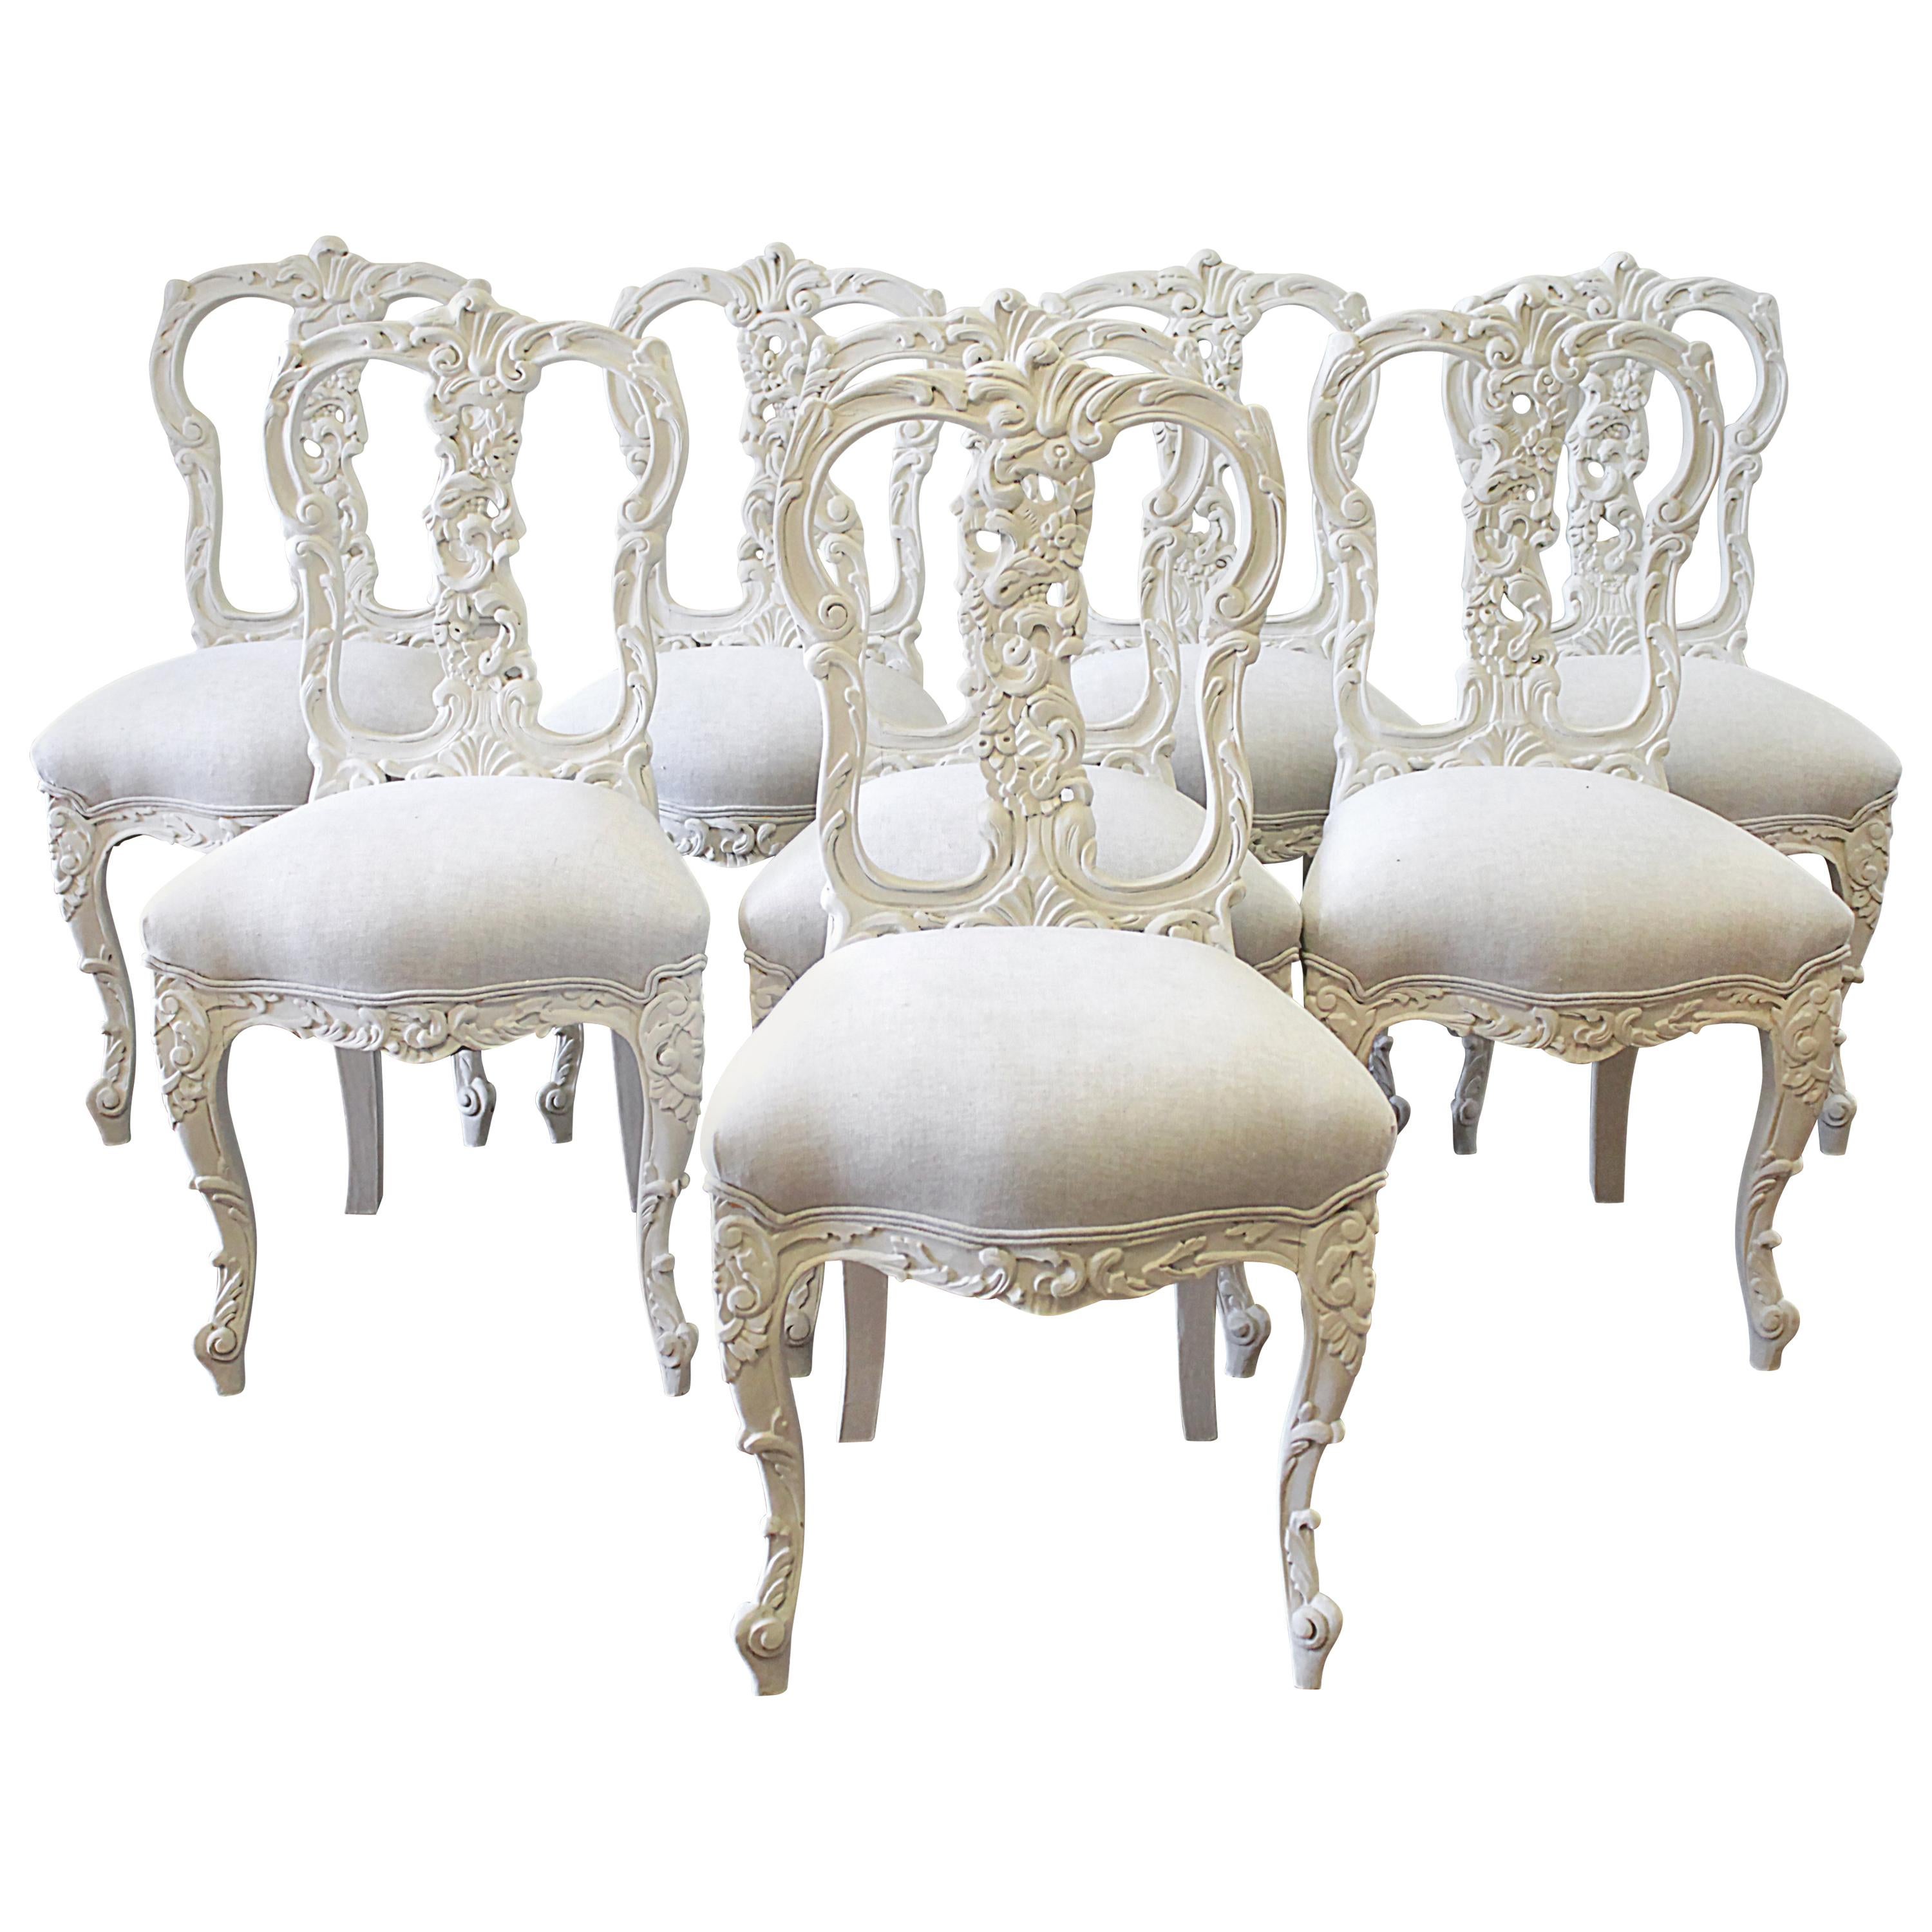 Set of 8 White Carved and Painted Dining Chairs